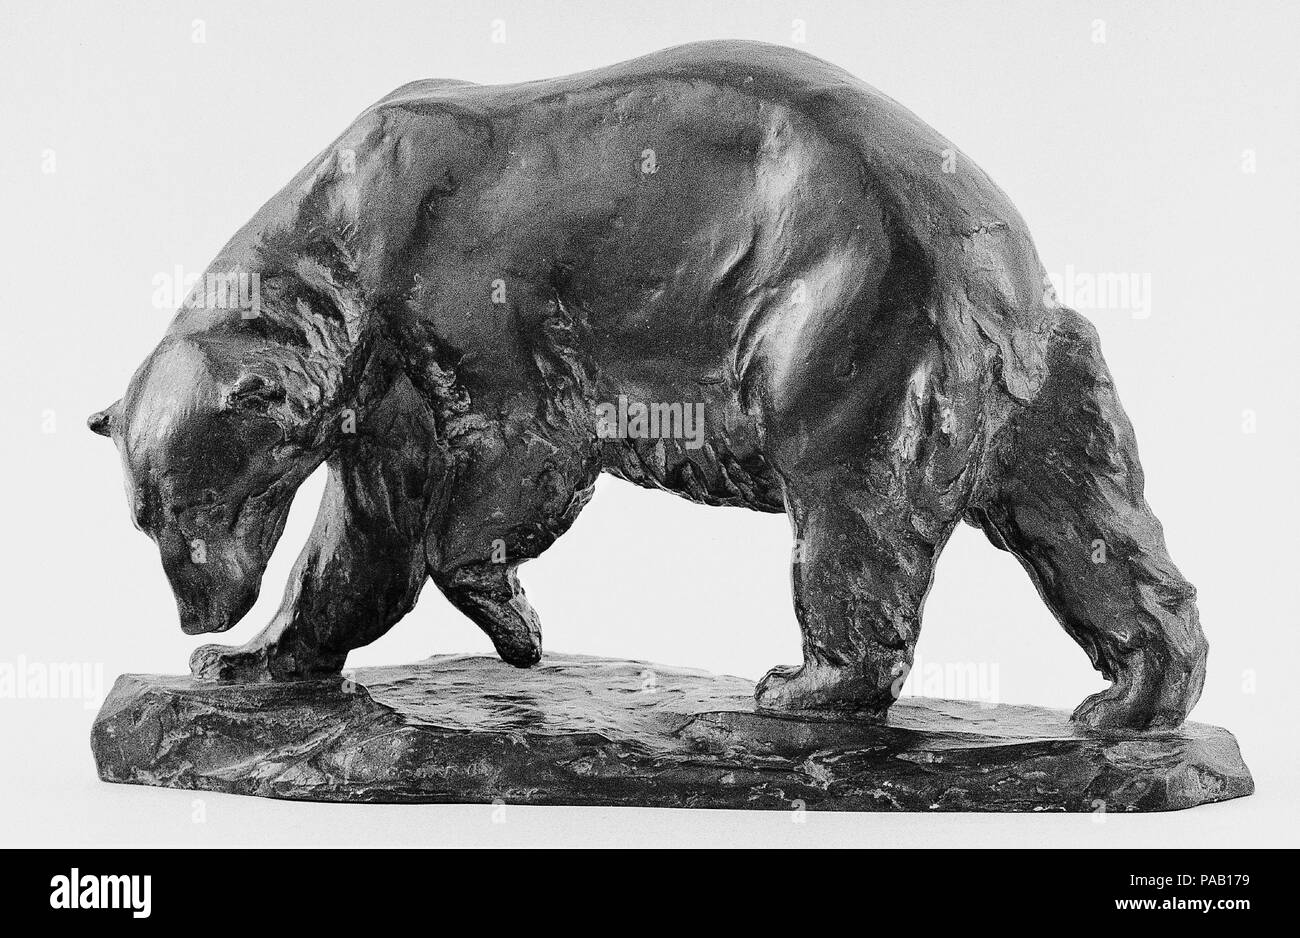 Polar Bear. Artist: Frederick George Richard Roth (American, Brooklyn, New York 1872-1944 Englewood, New Jersey). Dimensions: 7 1/2 x 2 3/4 x 4 in. (19.1 x 7 x 10.2 cm). Date: 1903, cast ca. 1906.  An accomplished animal sculptor, Roth often modeled his subjects in local zoos. 'Polar Bear' is probably his first study of this impressive animal, in which he emphasized its characteristic silhouette and easy, lumbering gait. Roth's careful depiction of the bear's muscles, bones, and fur reflects his training in both veterinary medicine and art. This statuette is one of five in the Metropolitan's c Stock Photo